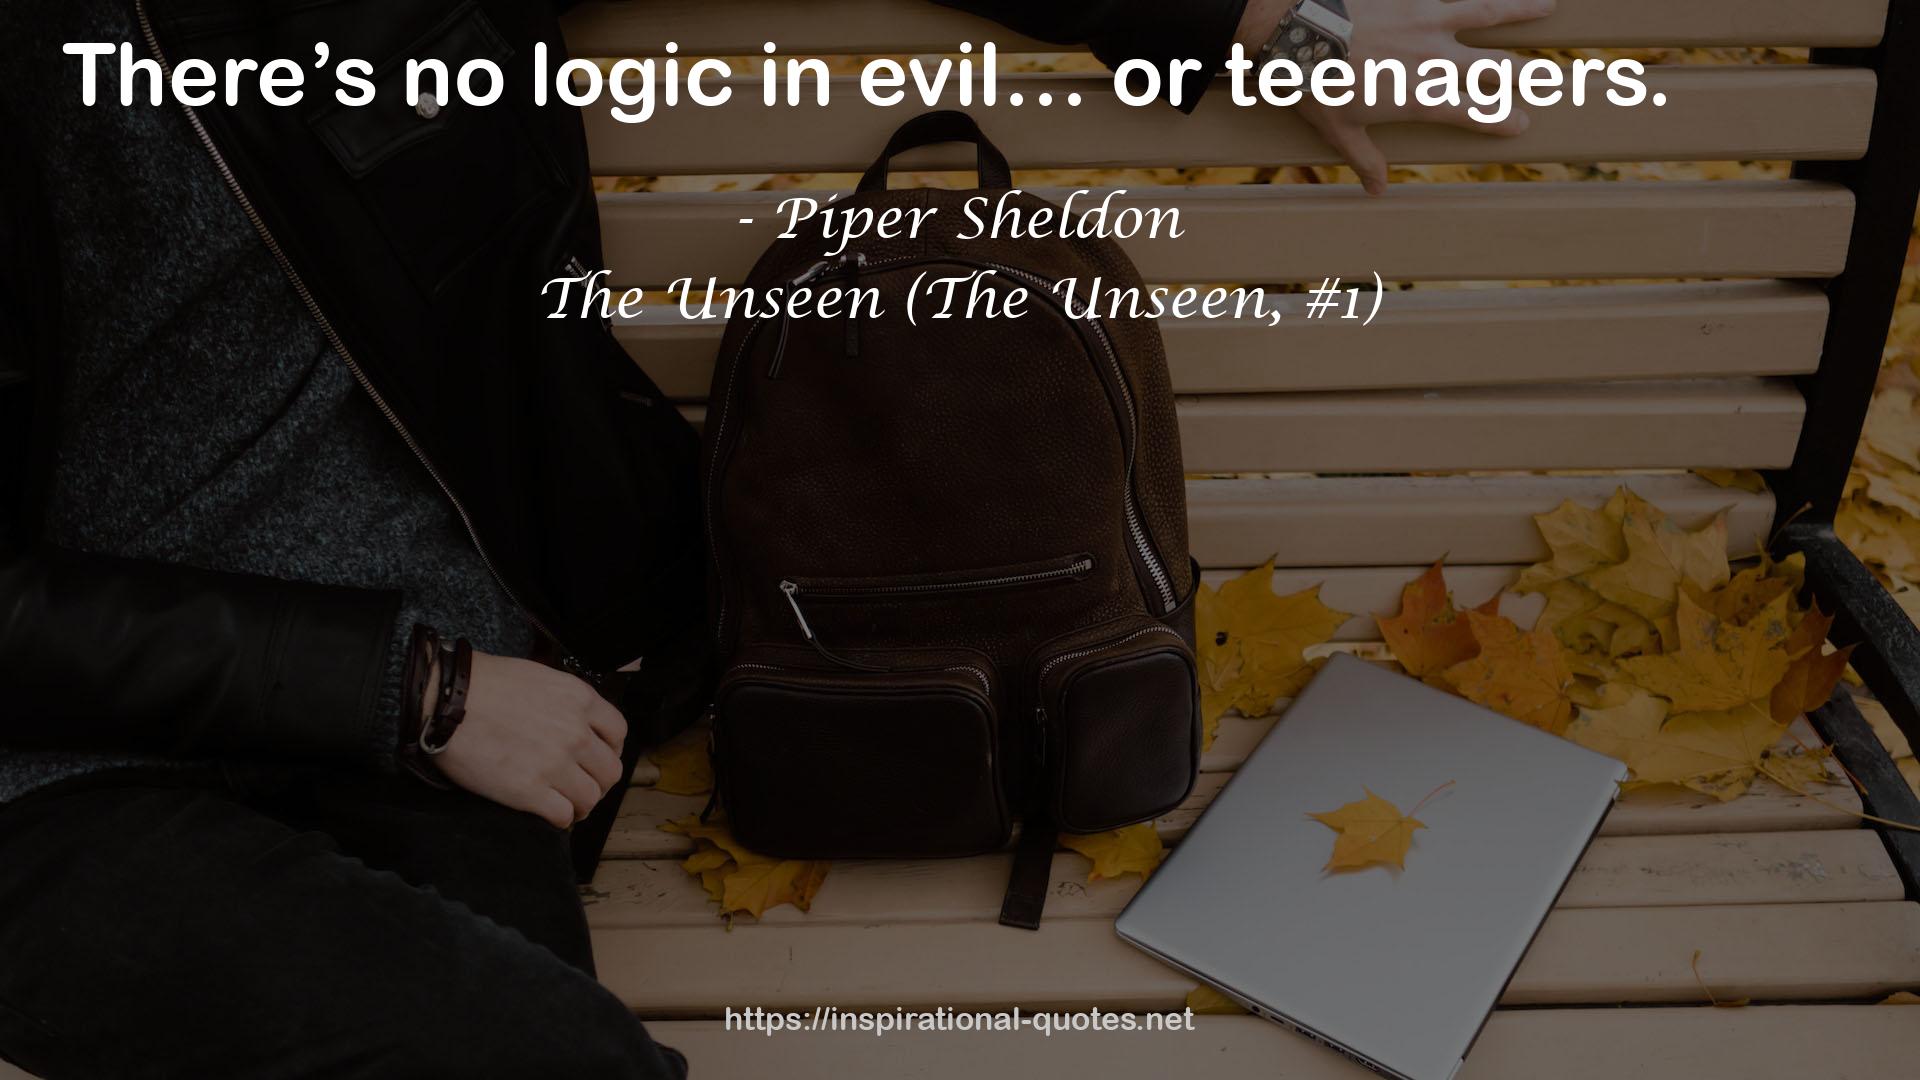 The Unseen (The Unseen, #1) QUOTES